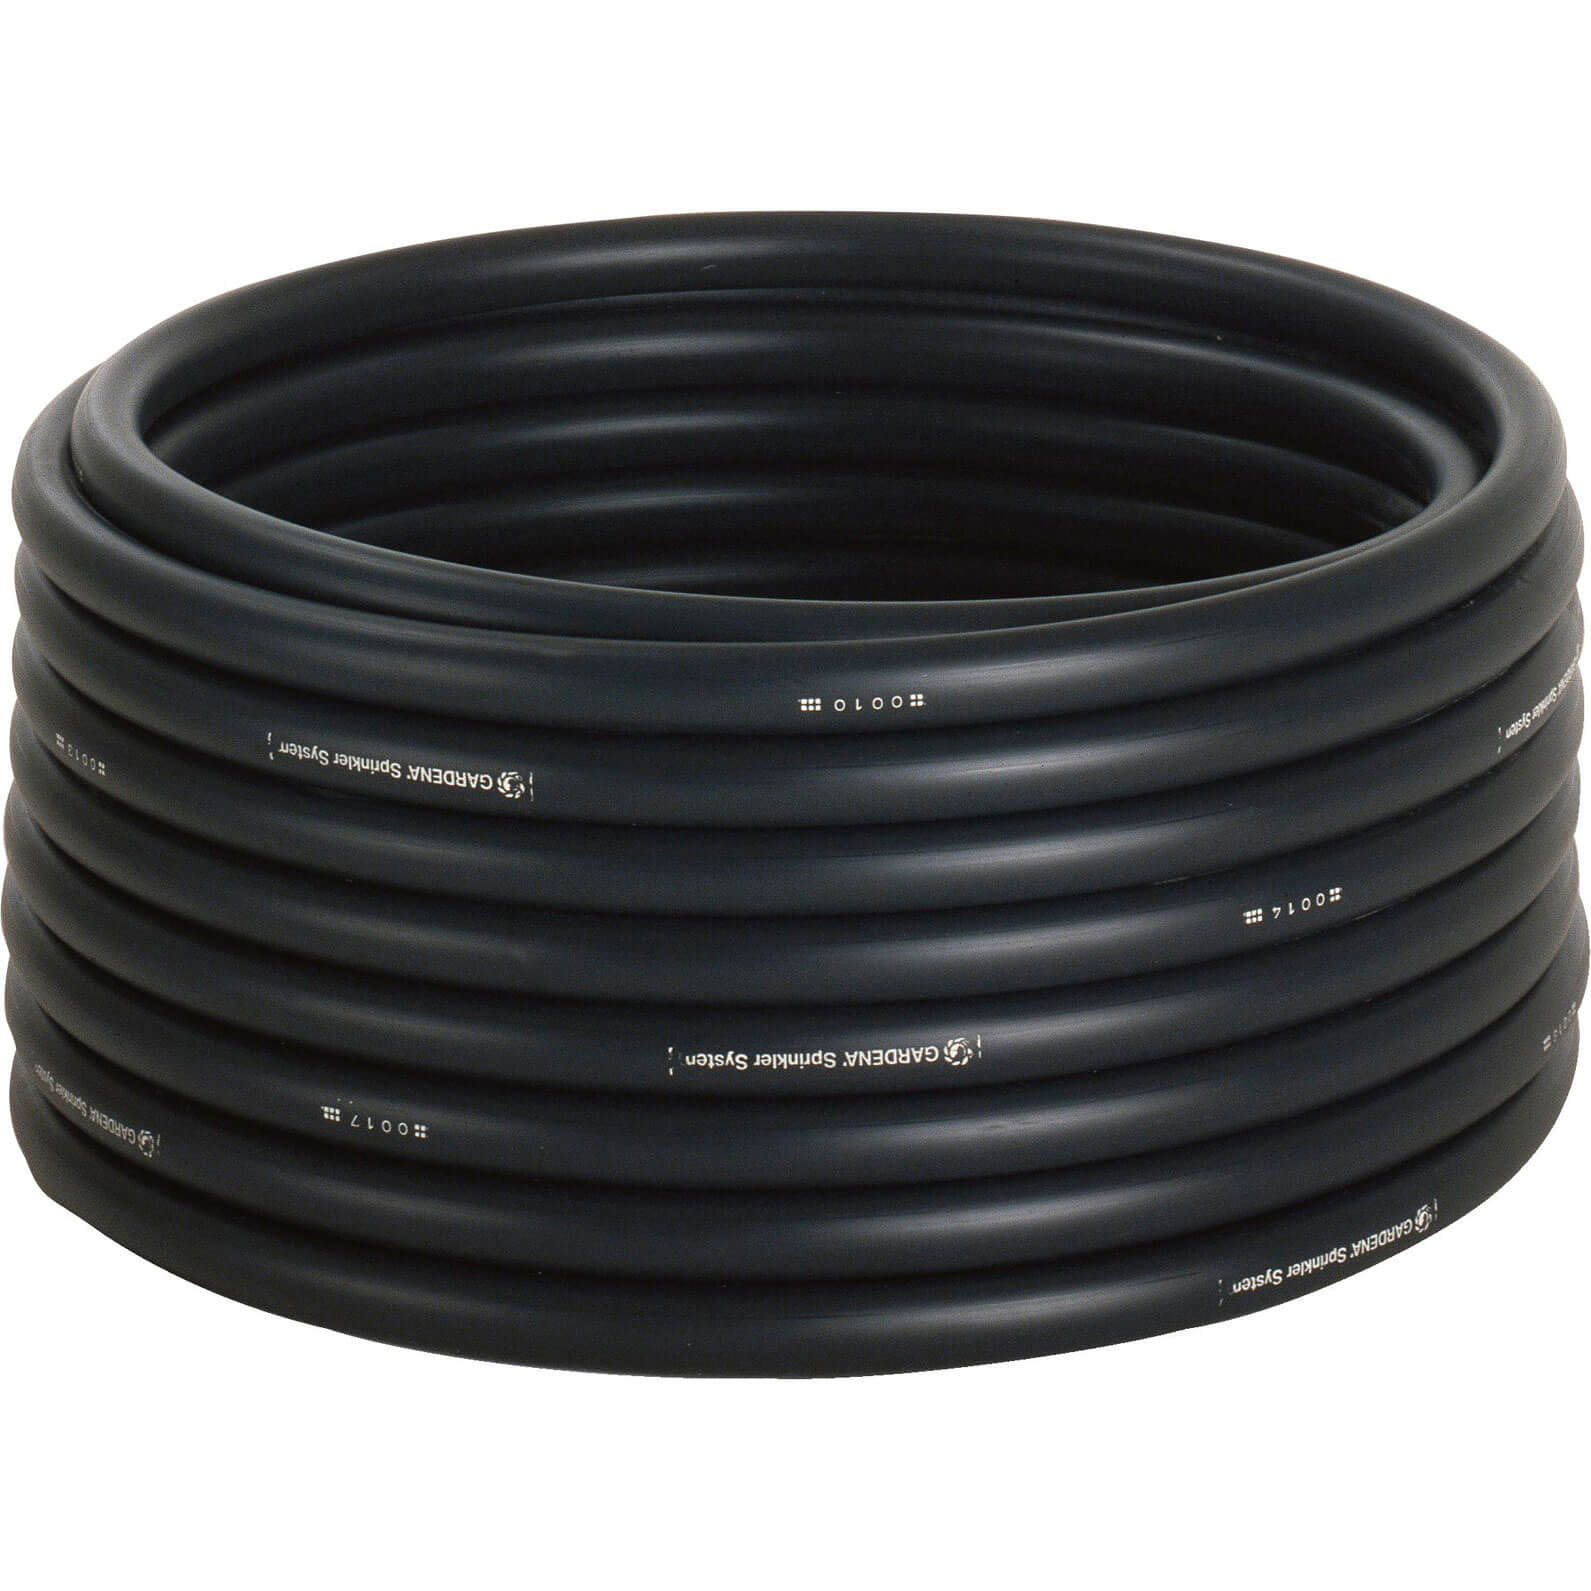 Gardena PIPELINE and SPRINKLERSYSTEM Connecting Hose Pipe 1" / 25mm 50m